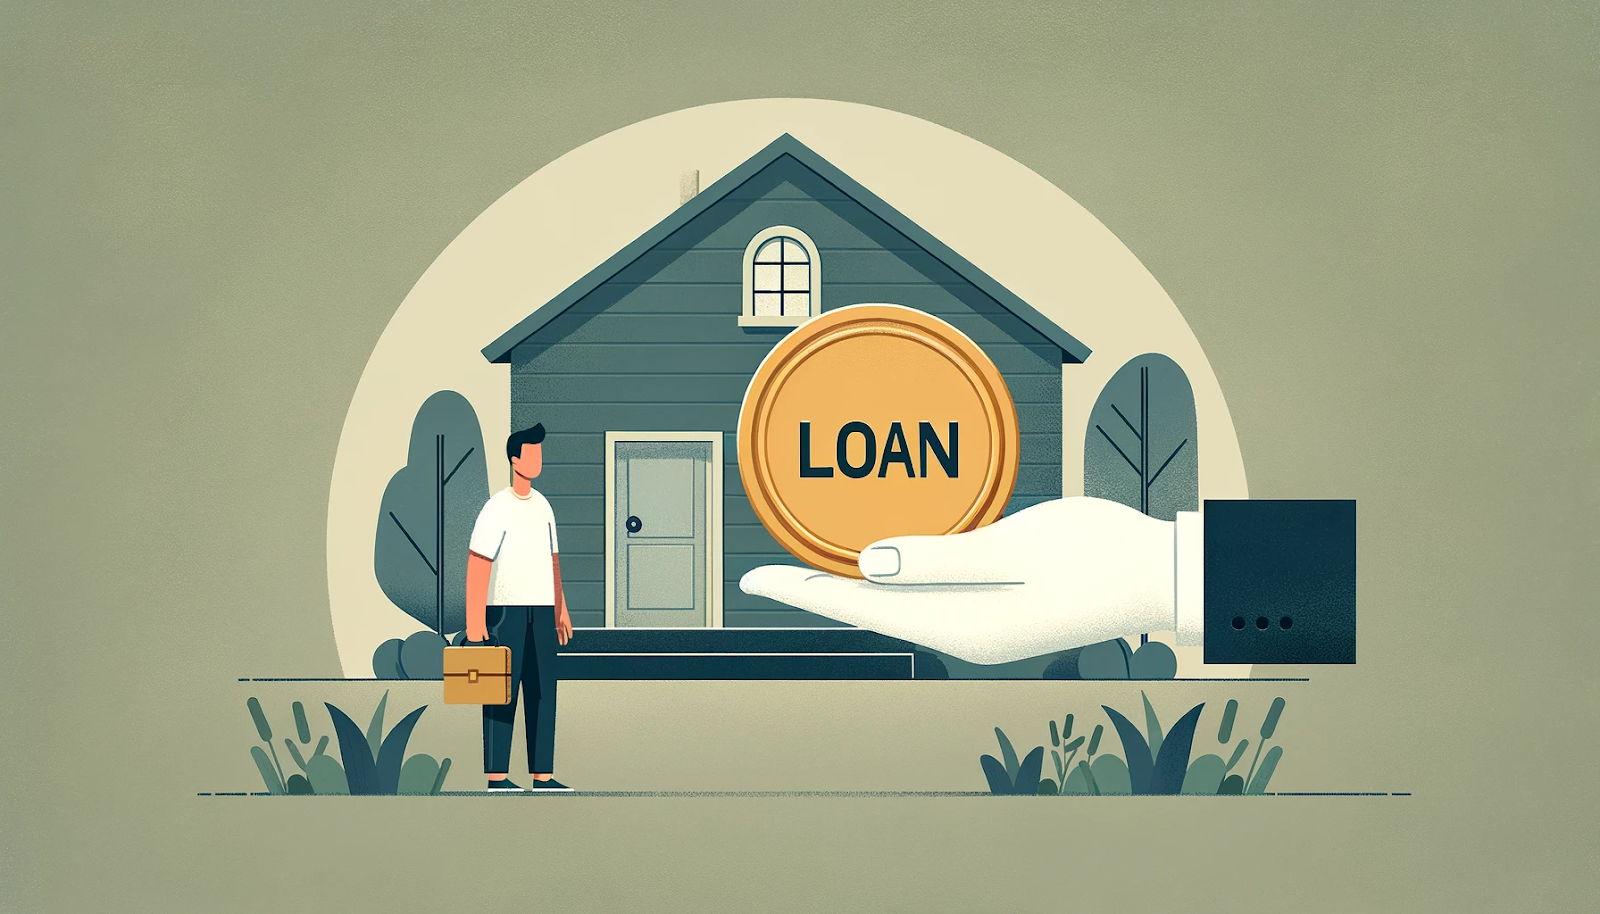 How Can an Intra-family Loan Help My Child Acquire a Property? An intra-family loan helps your child buy property by offering better terms and aiding those who can't secure traditional financing.